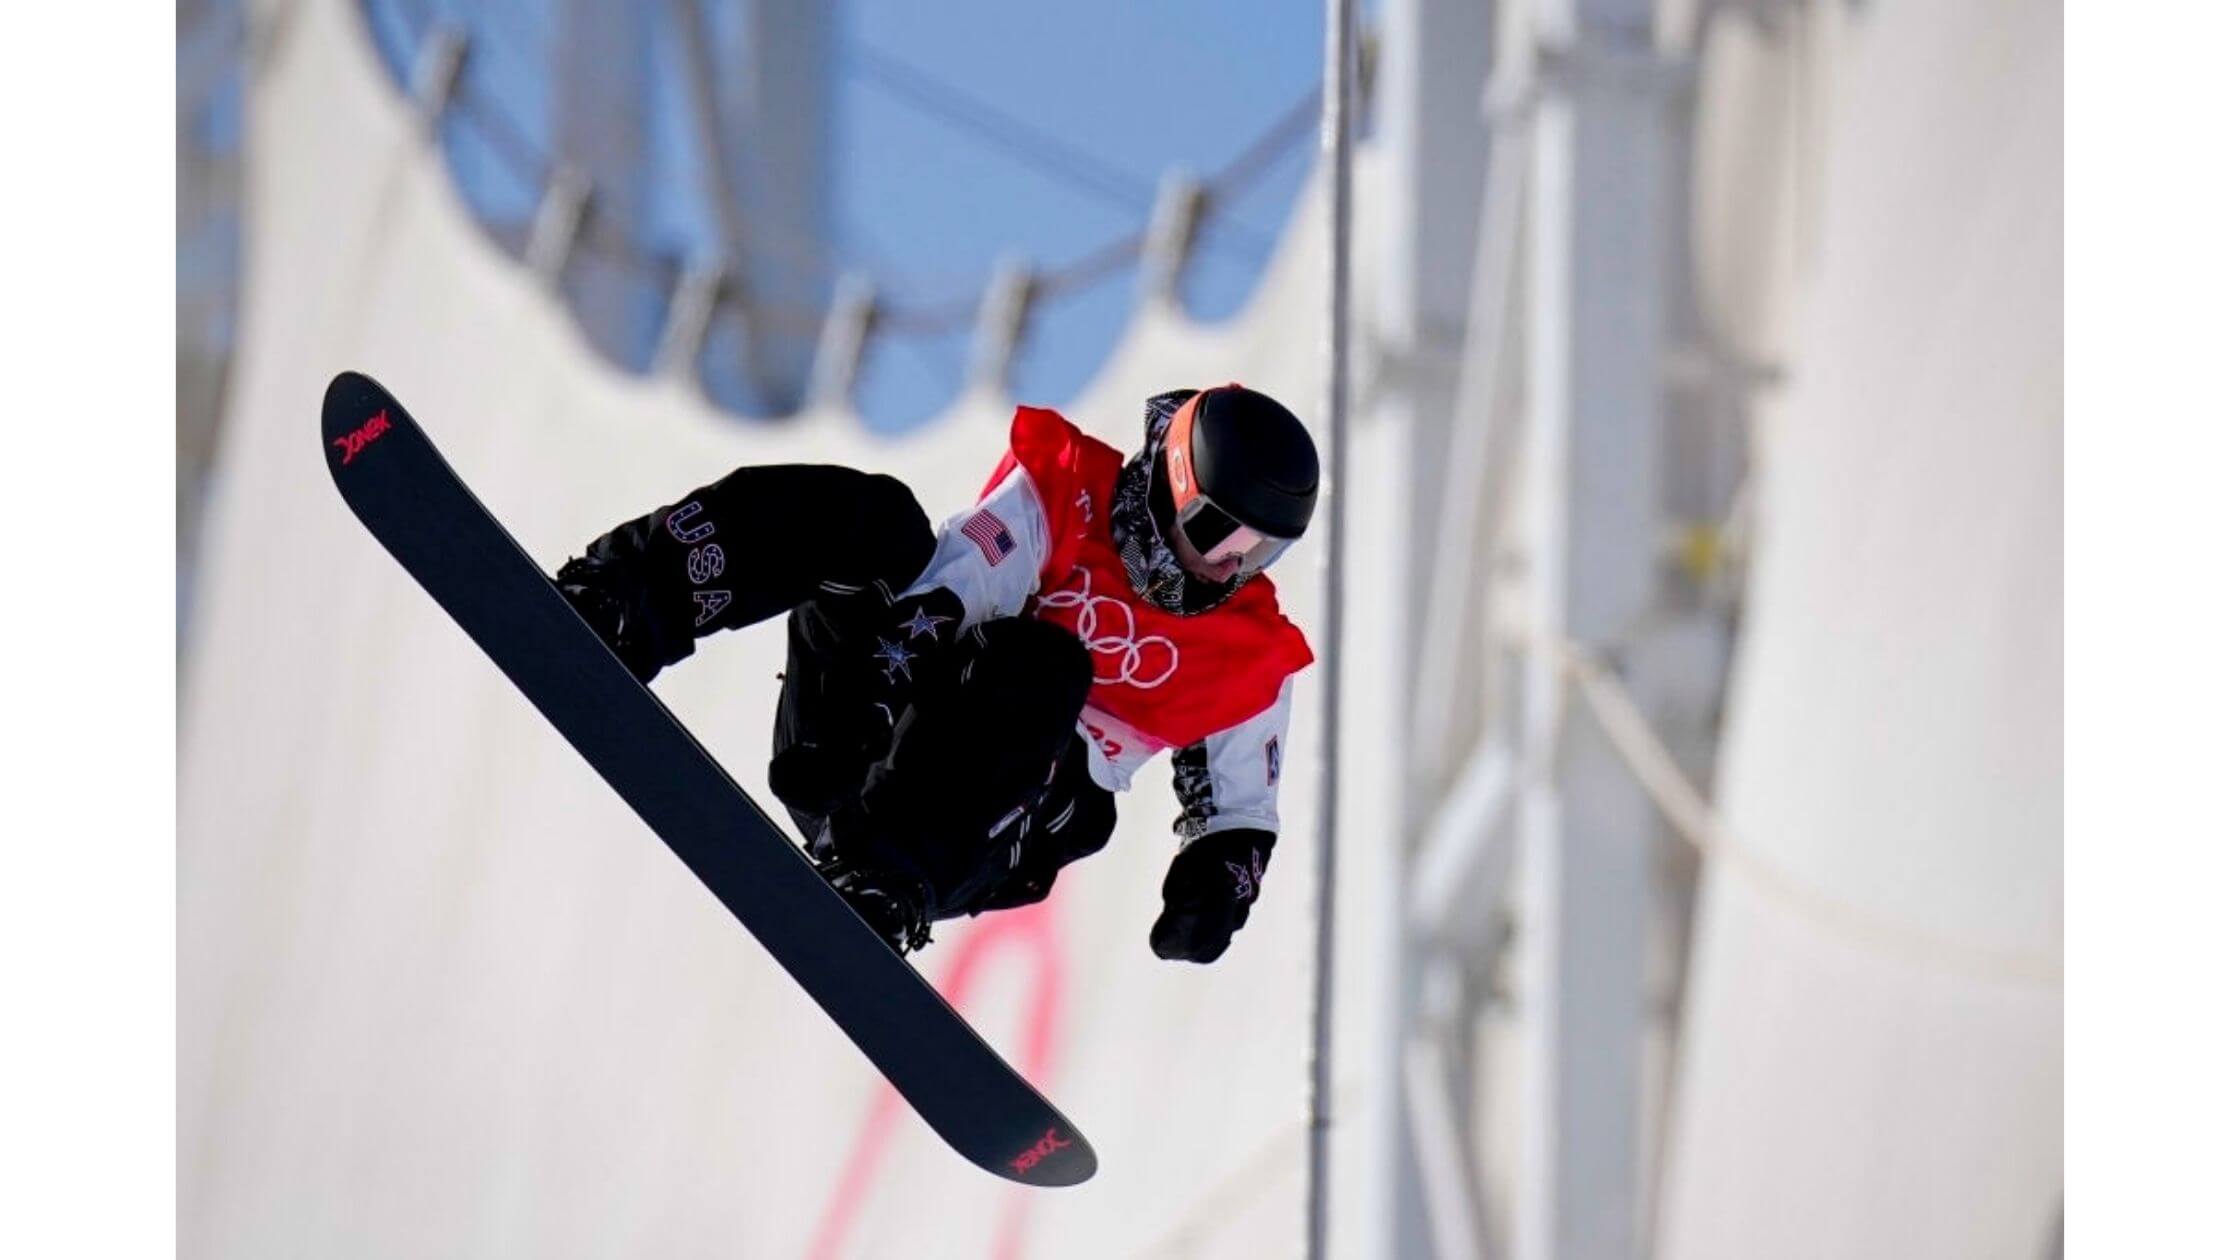 Beijing Winter Olympics 2022 Snowboarder Taylor Gold Of Team USA Takes The Fifth Position In Halfpipe